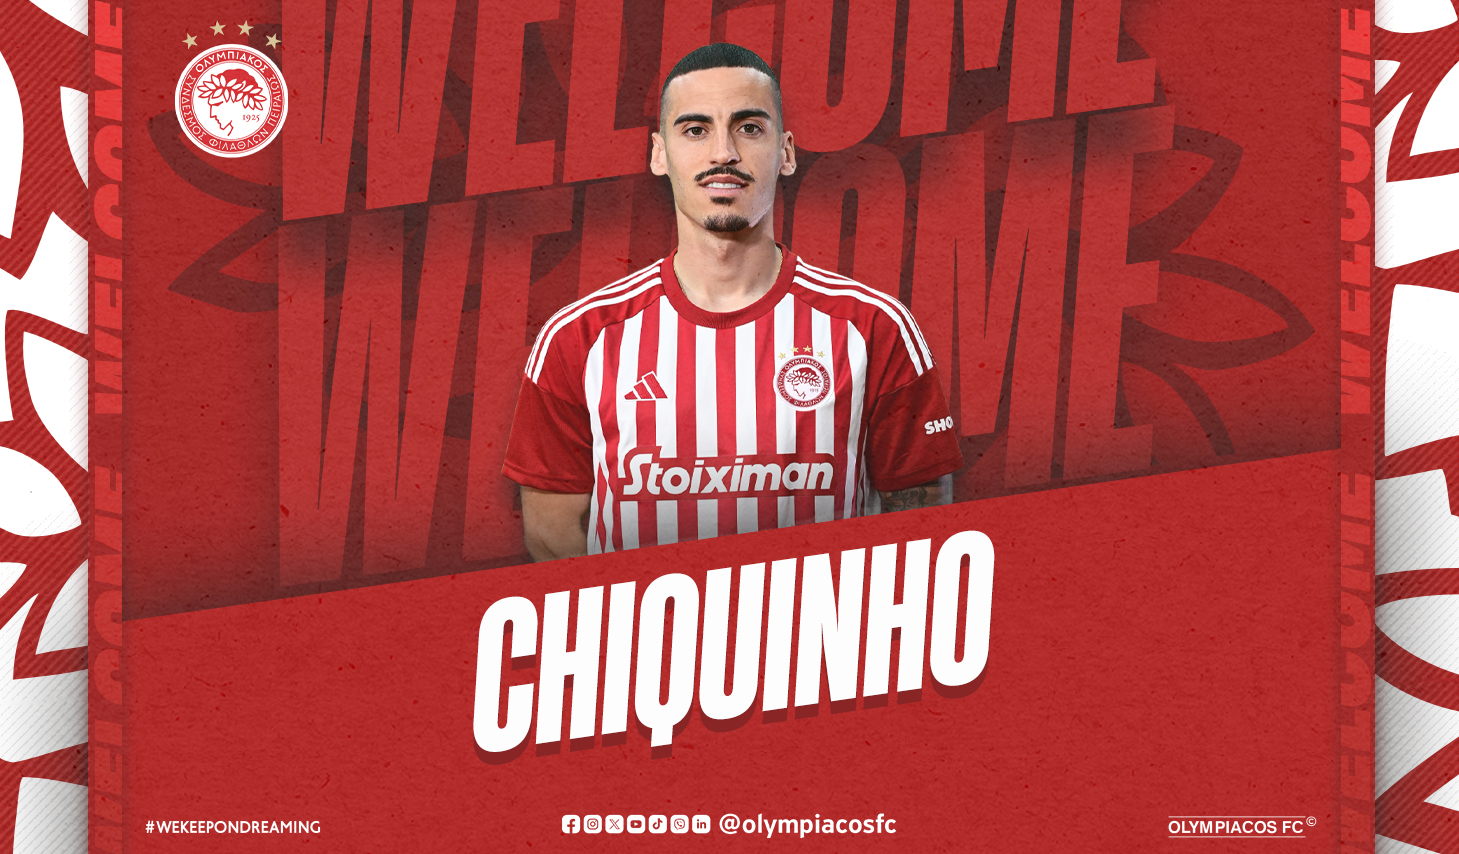 Chiquinho joins Olympiacos